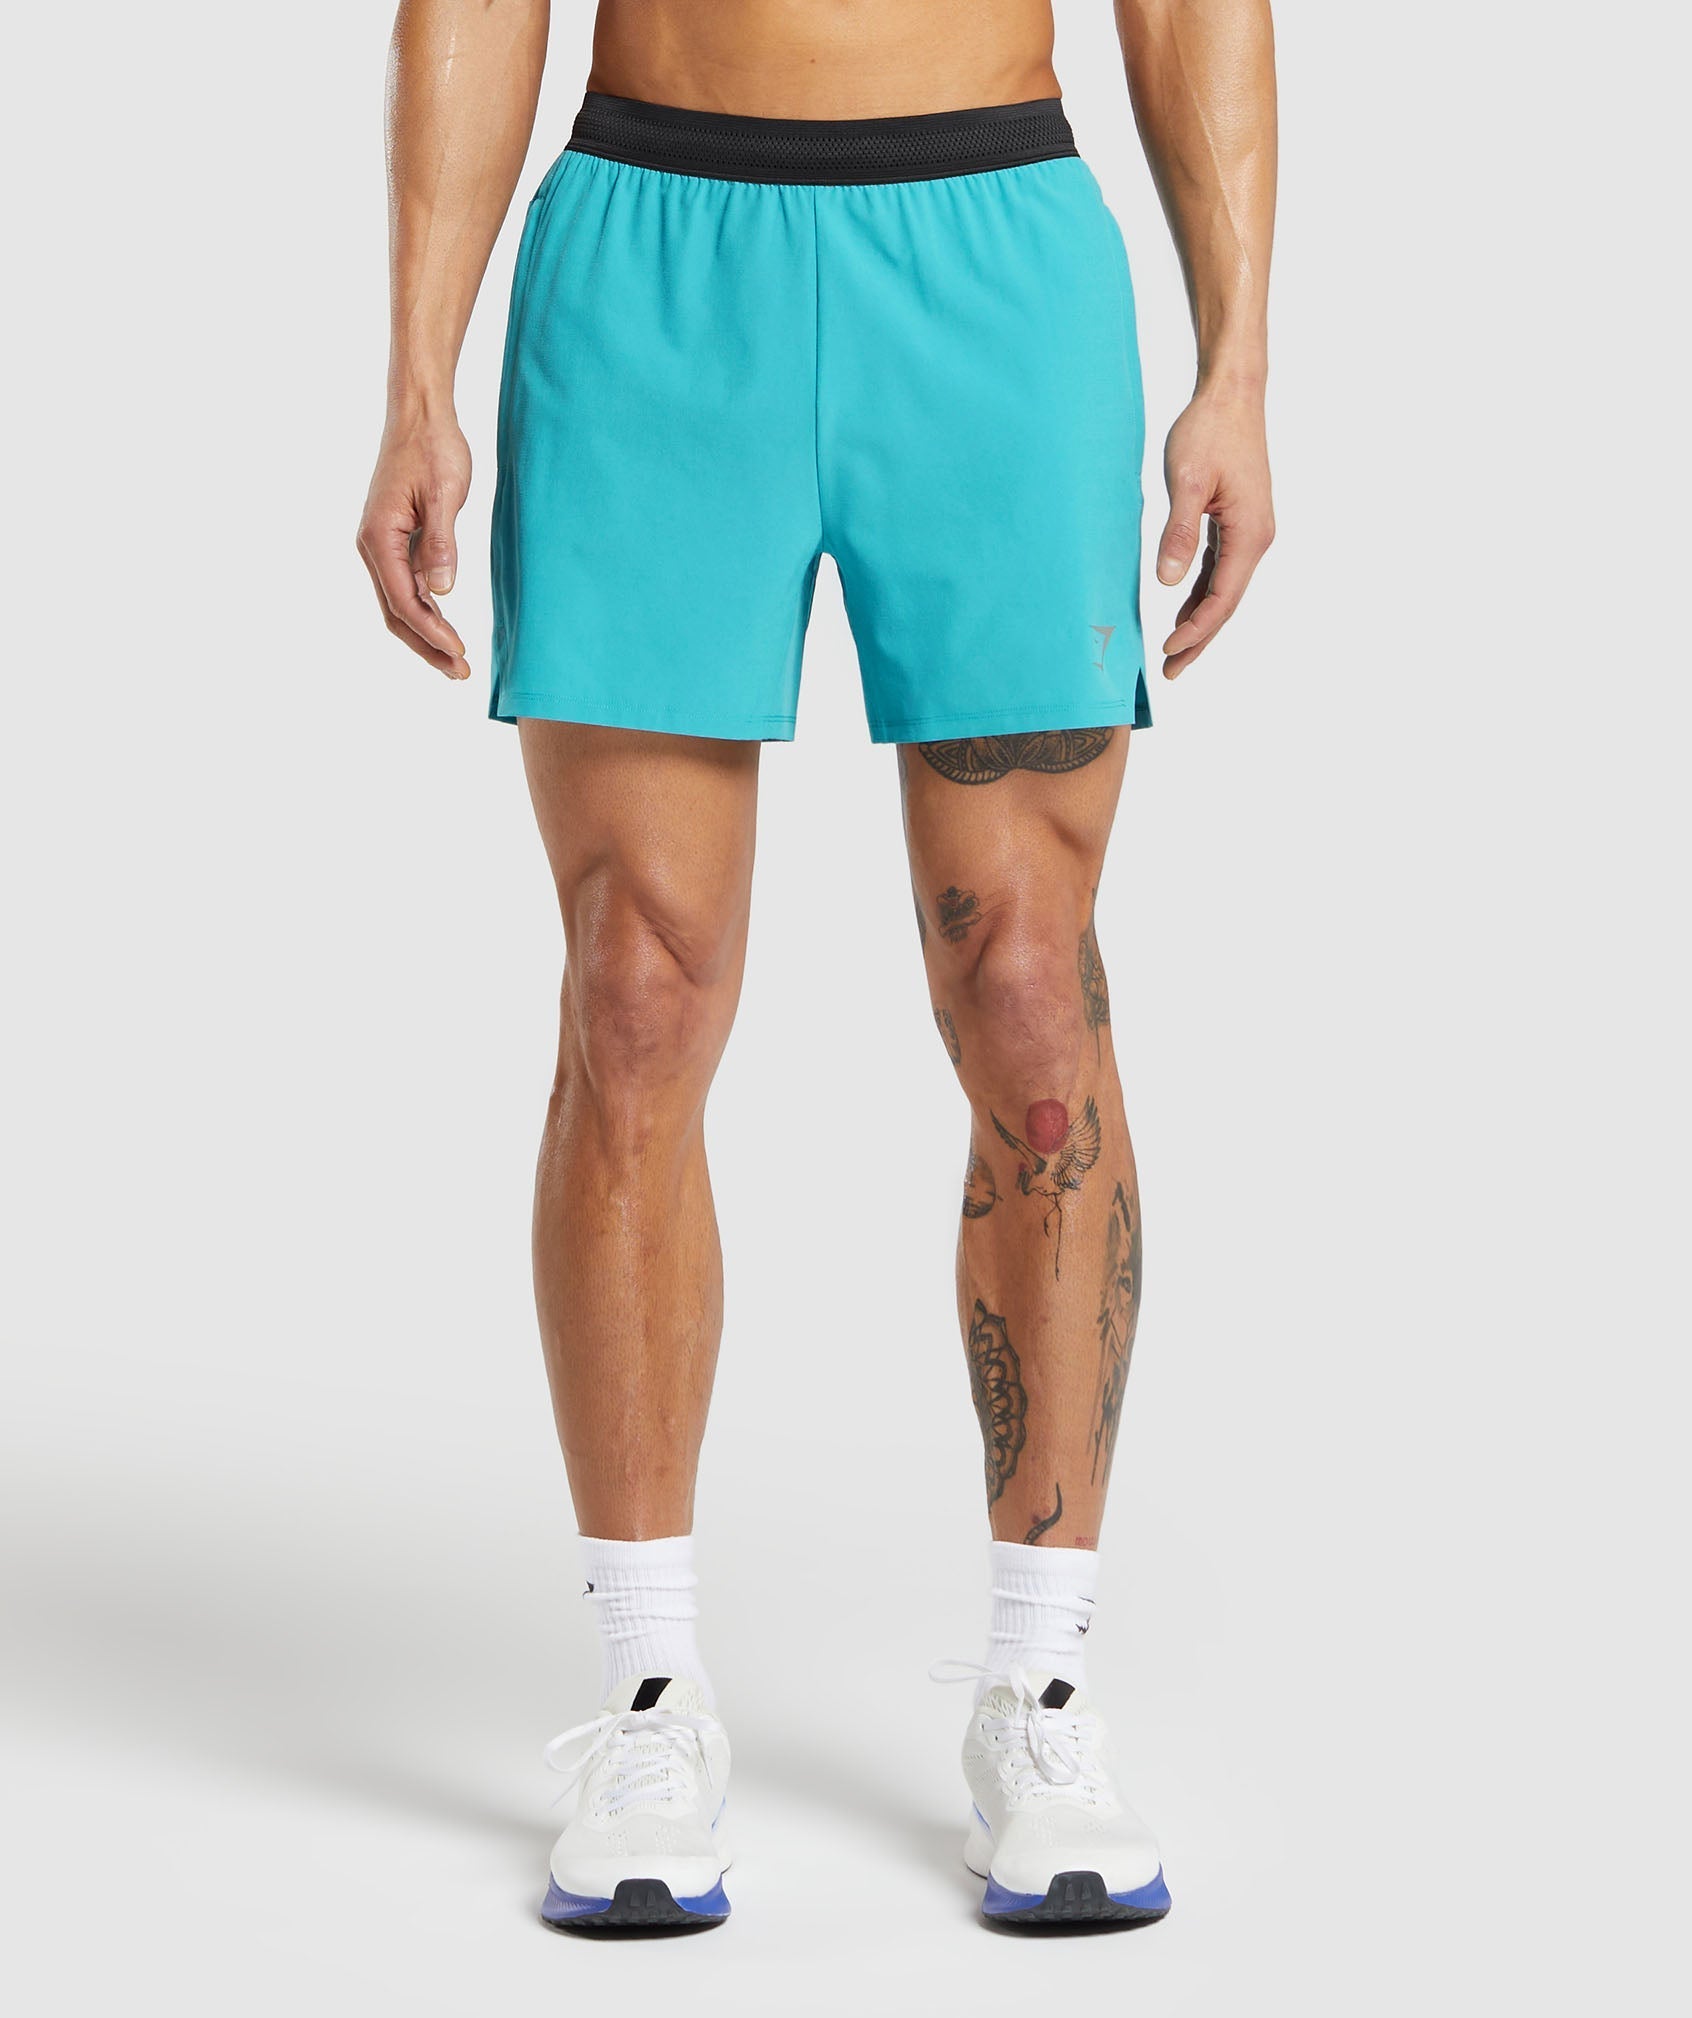 Speed 5" Shorts in Artificial Teal - view 1